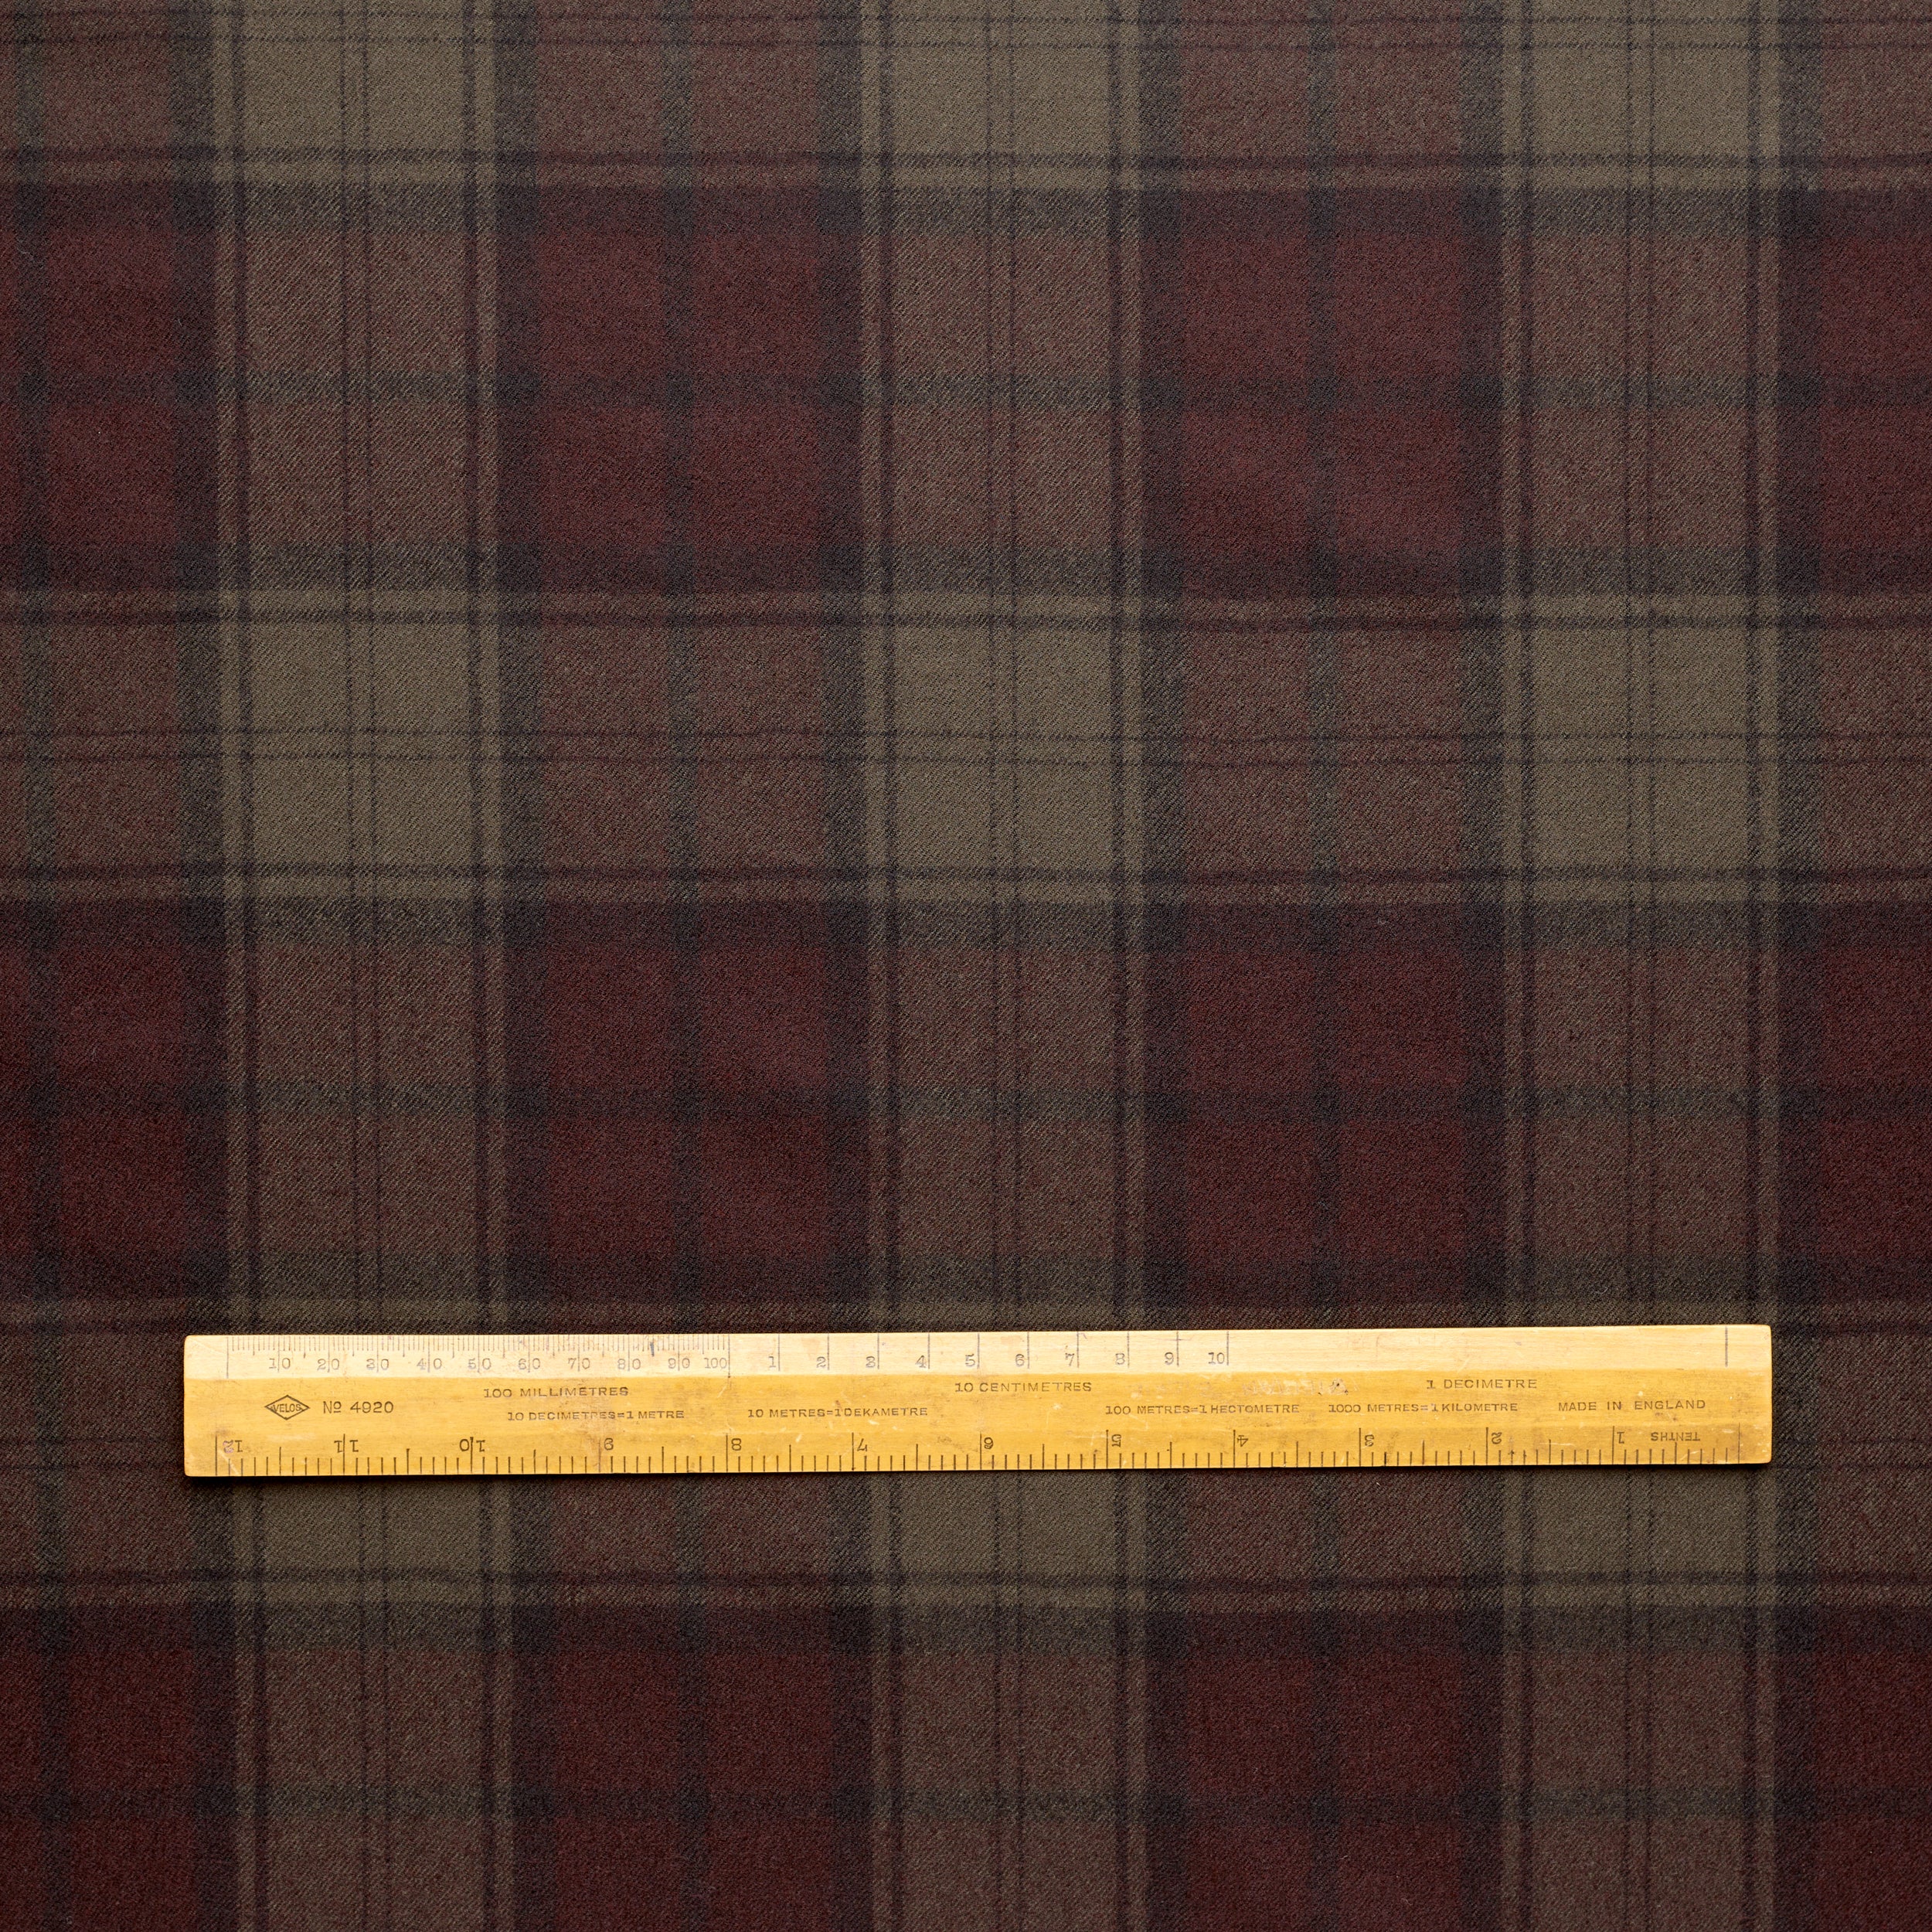 WF2-18 : Worsted Flannel Khaki Green & Brown Check